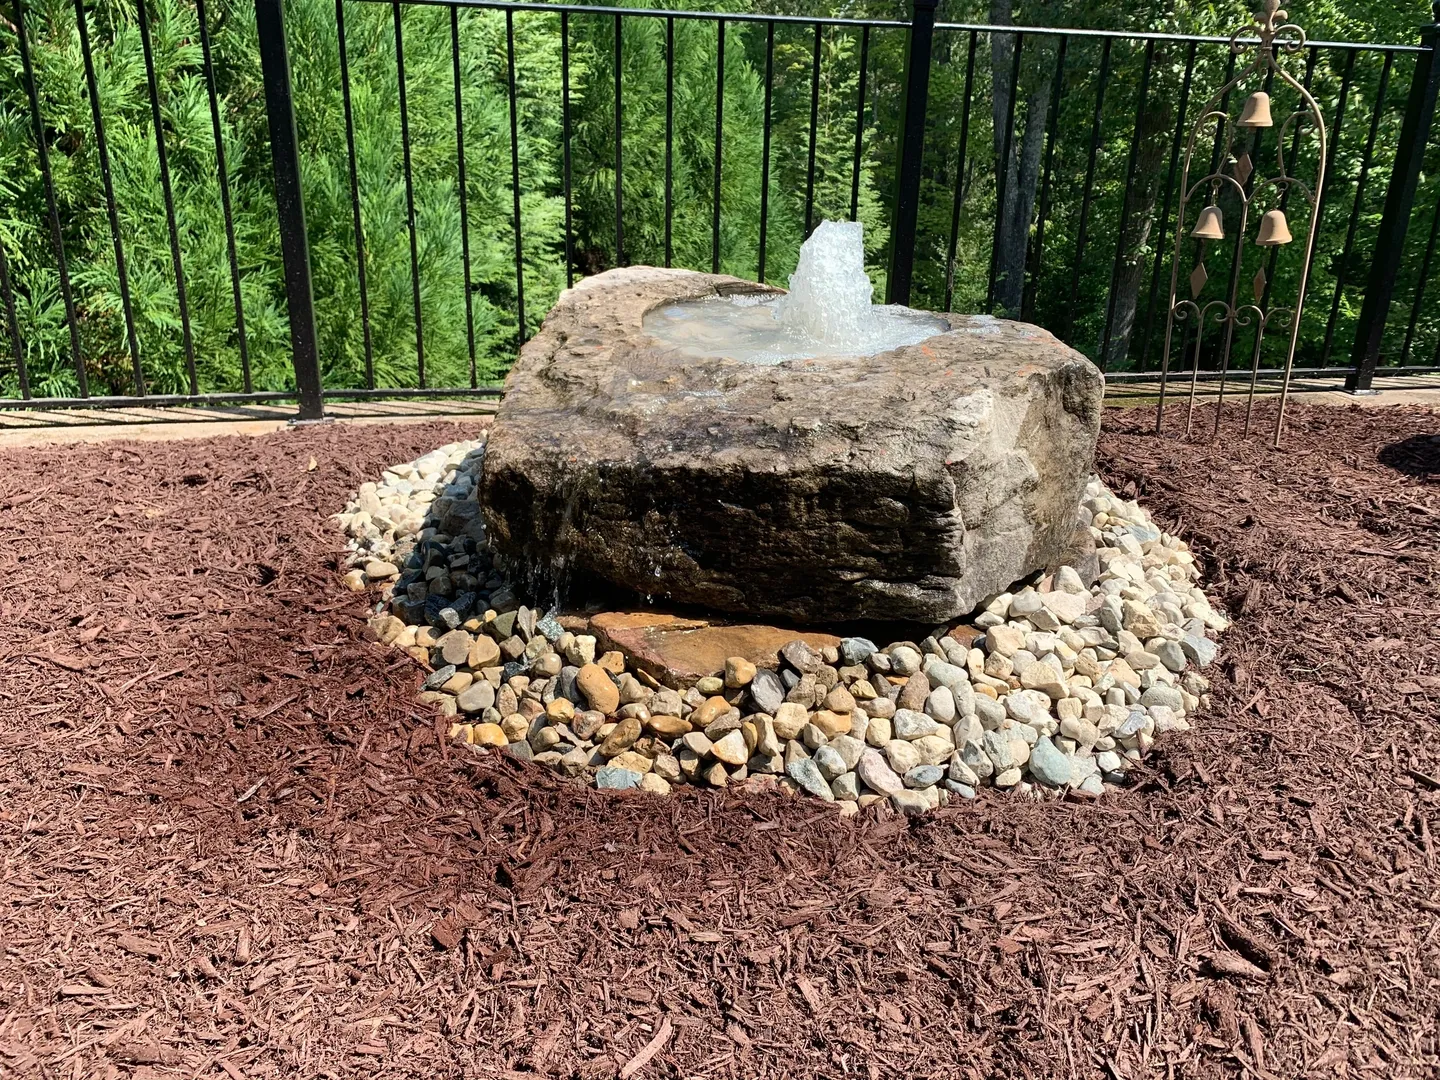 A fountain made of rocks and sand in the middle of a garden.